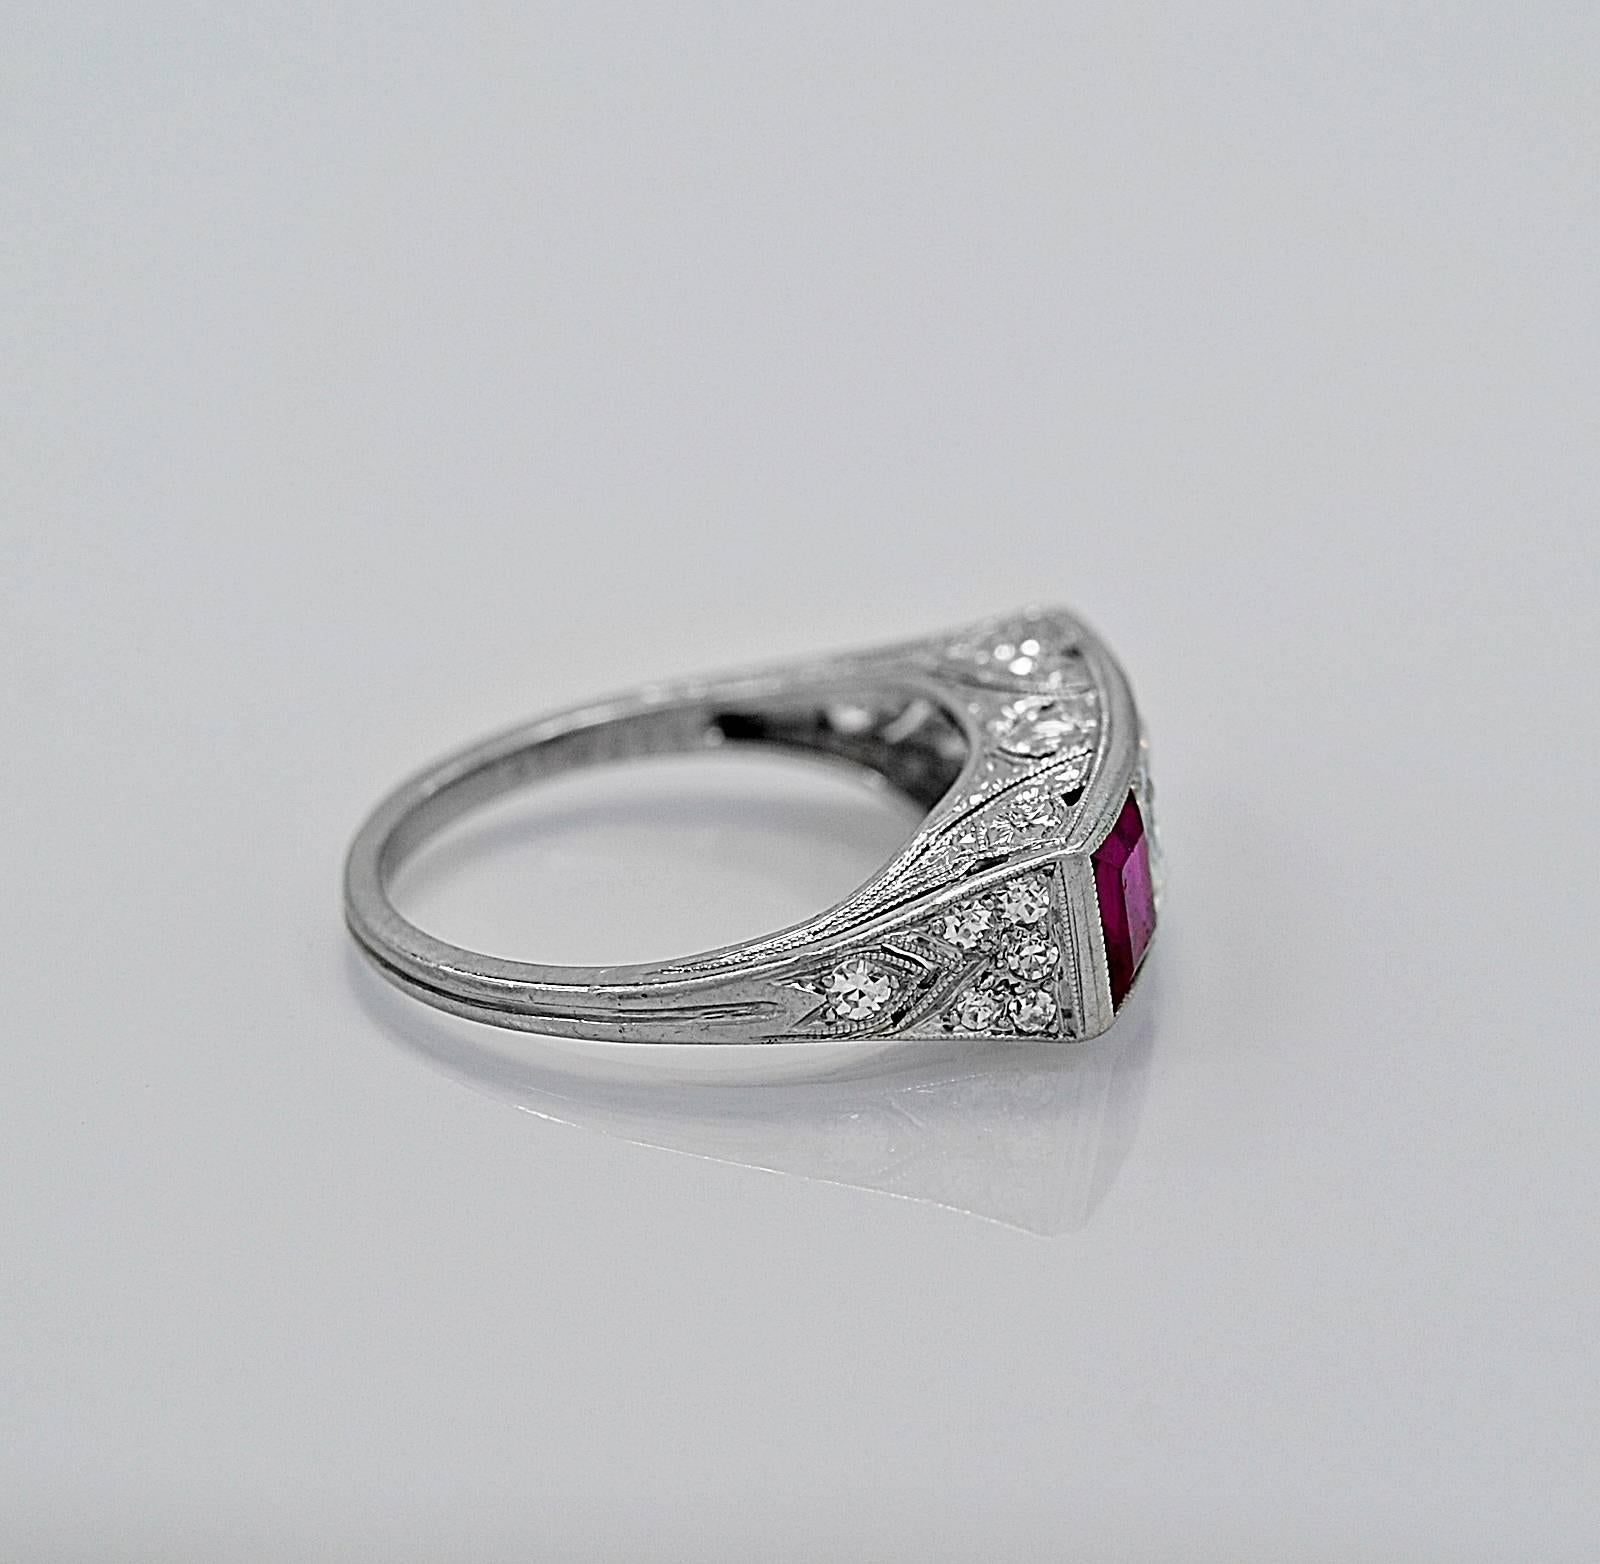 A geometrically tailored Art Deco ruby and diamond engagement ring with an accompanied A.G.L. cert. It features 2 Burma rubies that are unheated and weigh .75ct. apx. each that are set on each side of an emerald cut center diamond. This